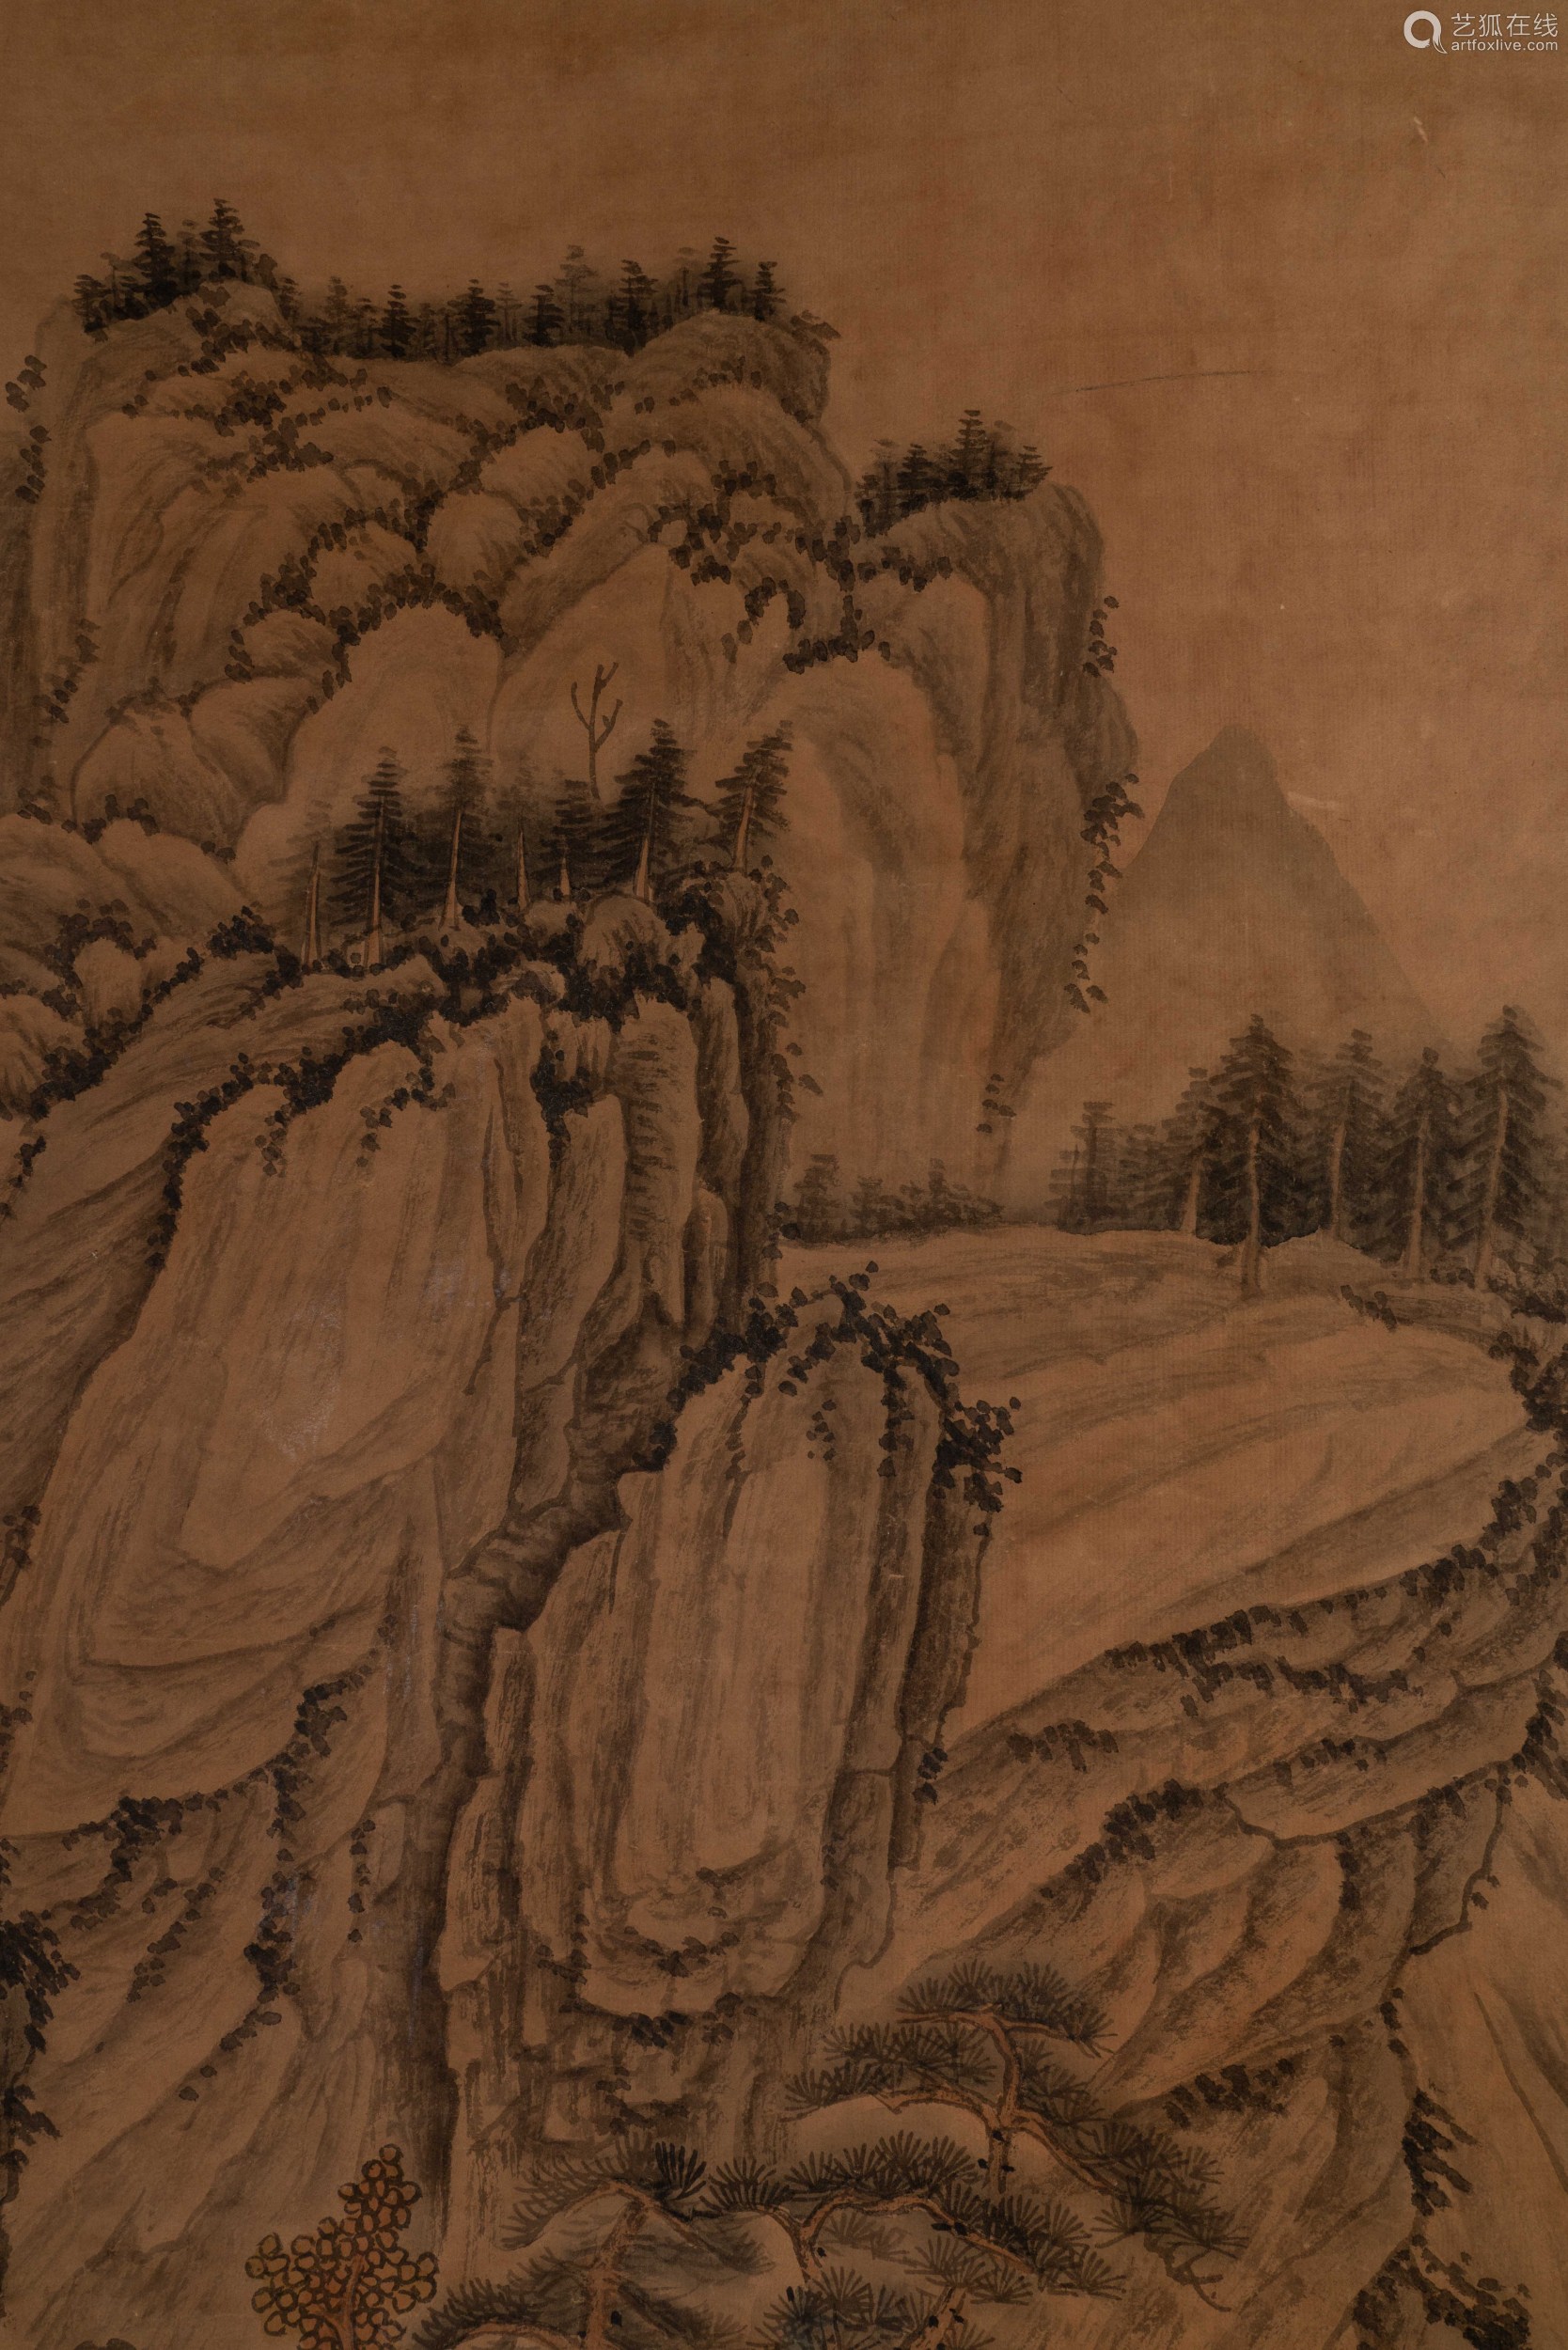 Feng Chaoran's view of the spring in Taibai